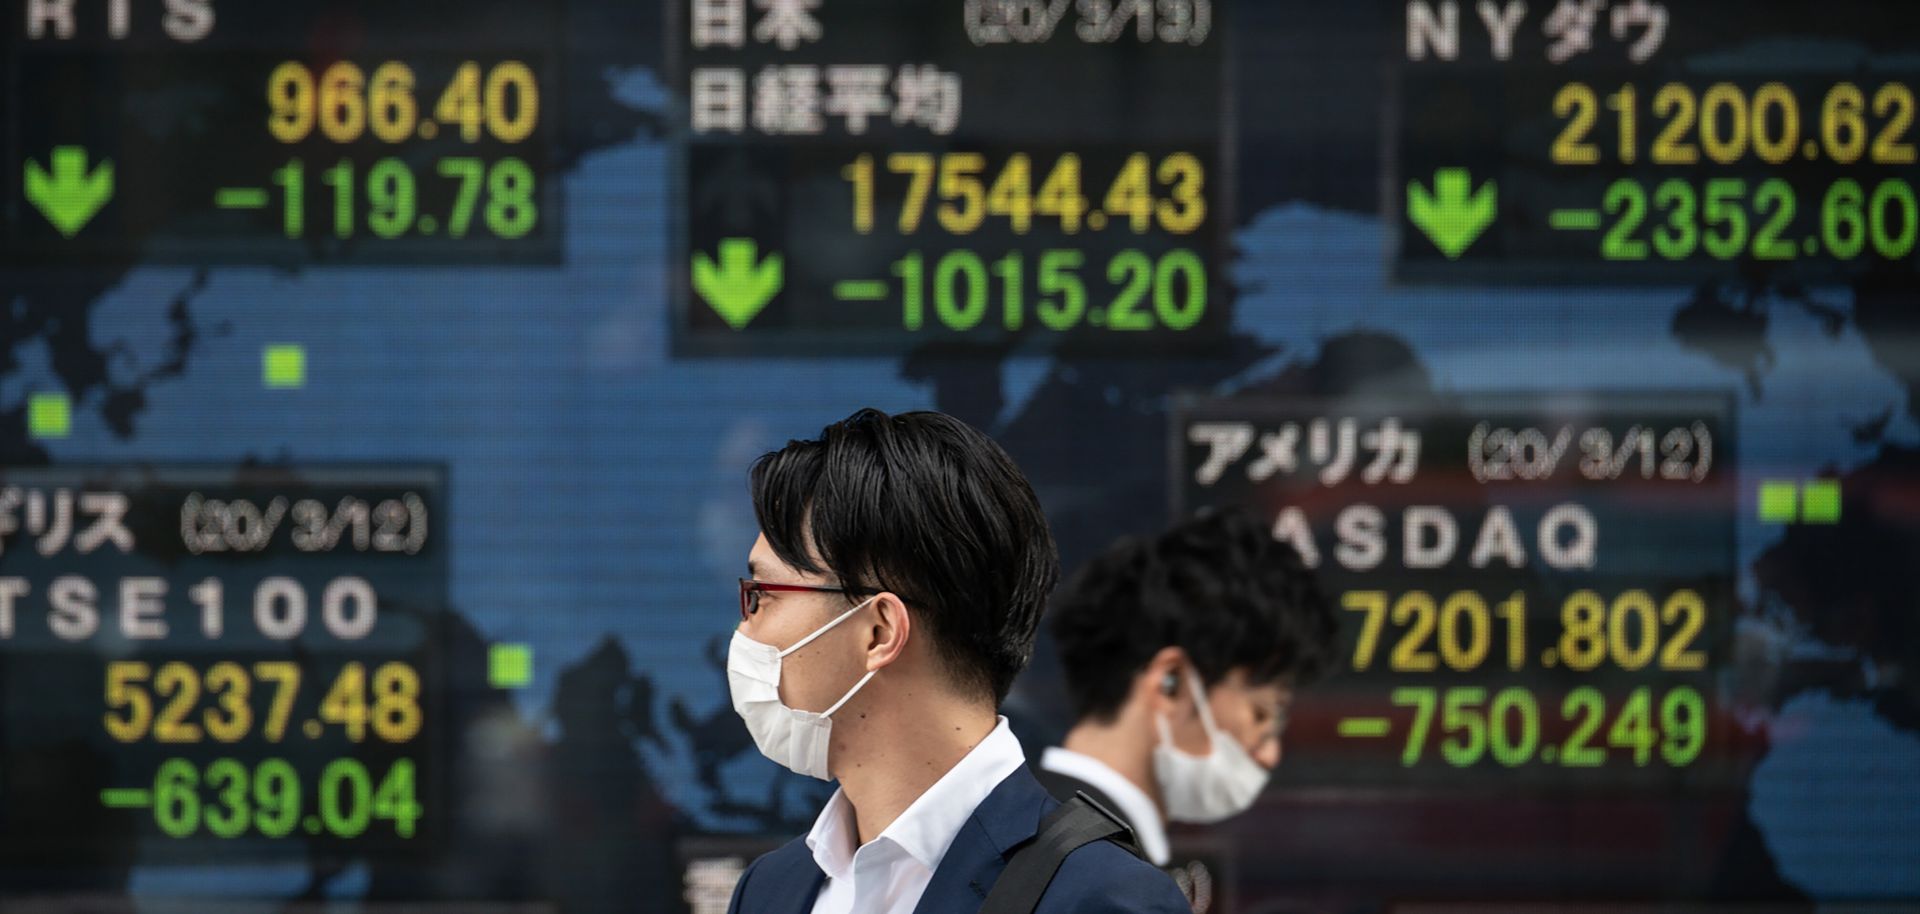 Pedestrians wearing face masks walk past an electric board showing the Nikkei 225 index (C) on the Tokyo Stock Exchange in Tokyo on March 13, 2020.